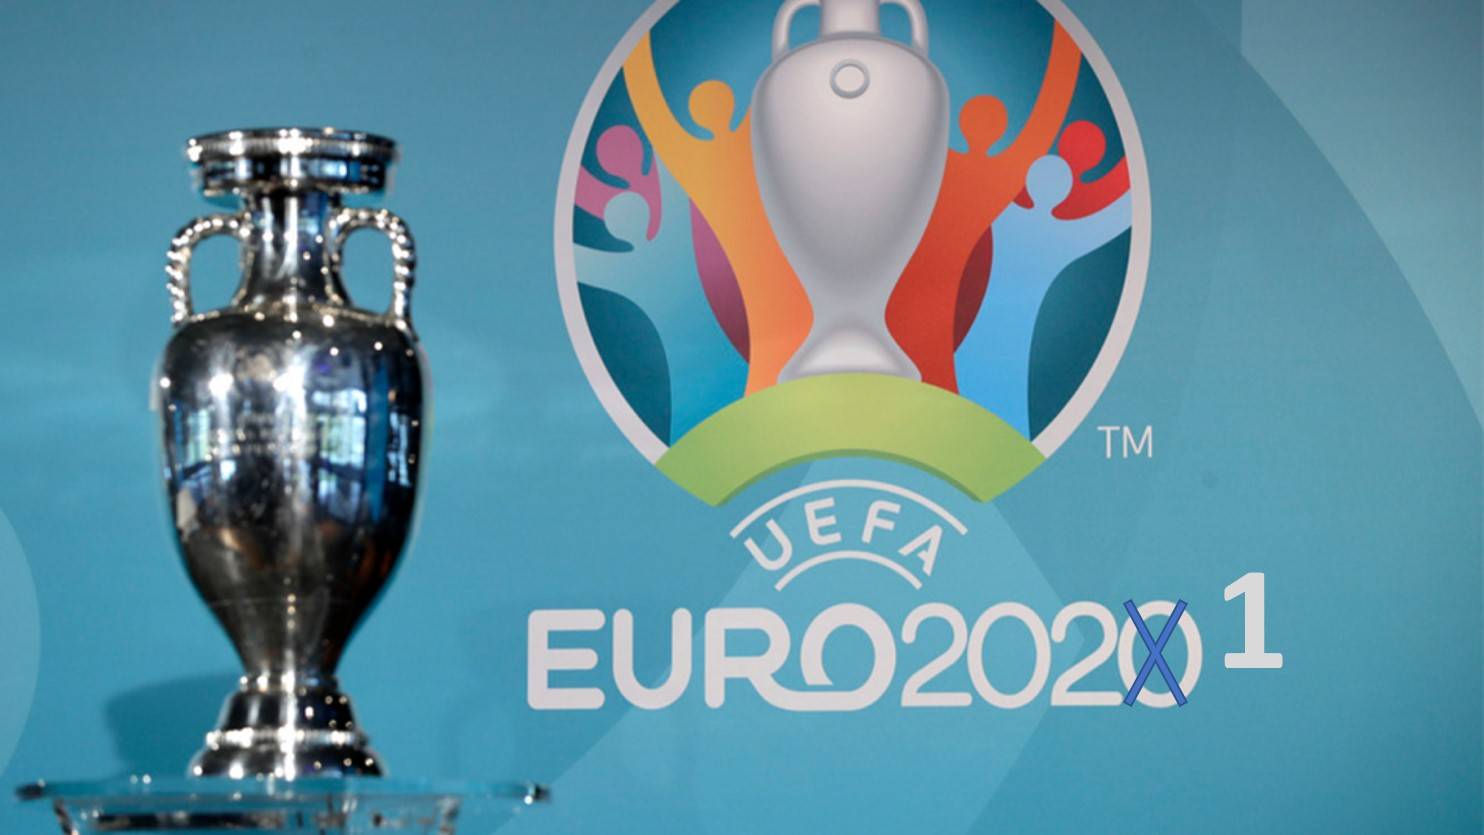 Europe's premier Football tournament postponed. Euro Cup will be held in 2021